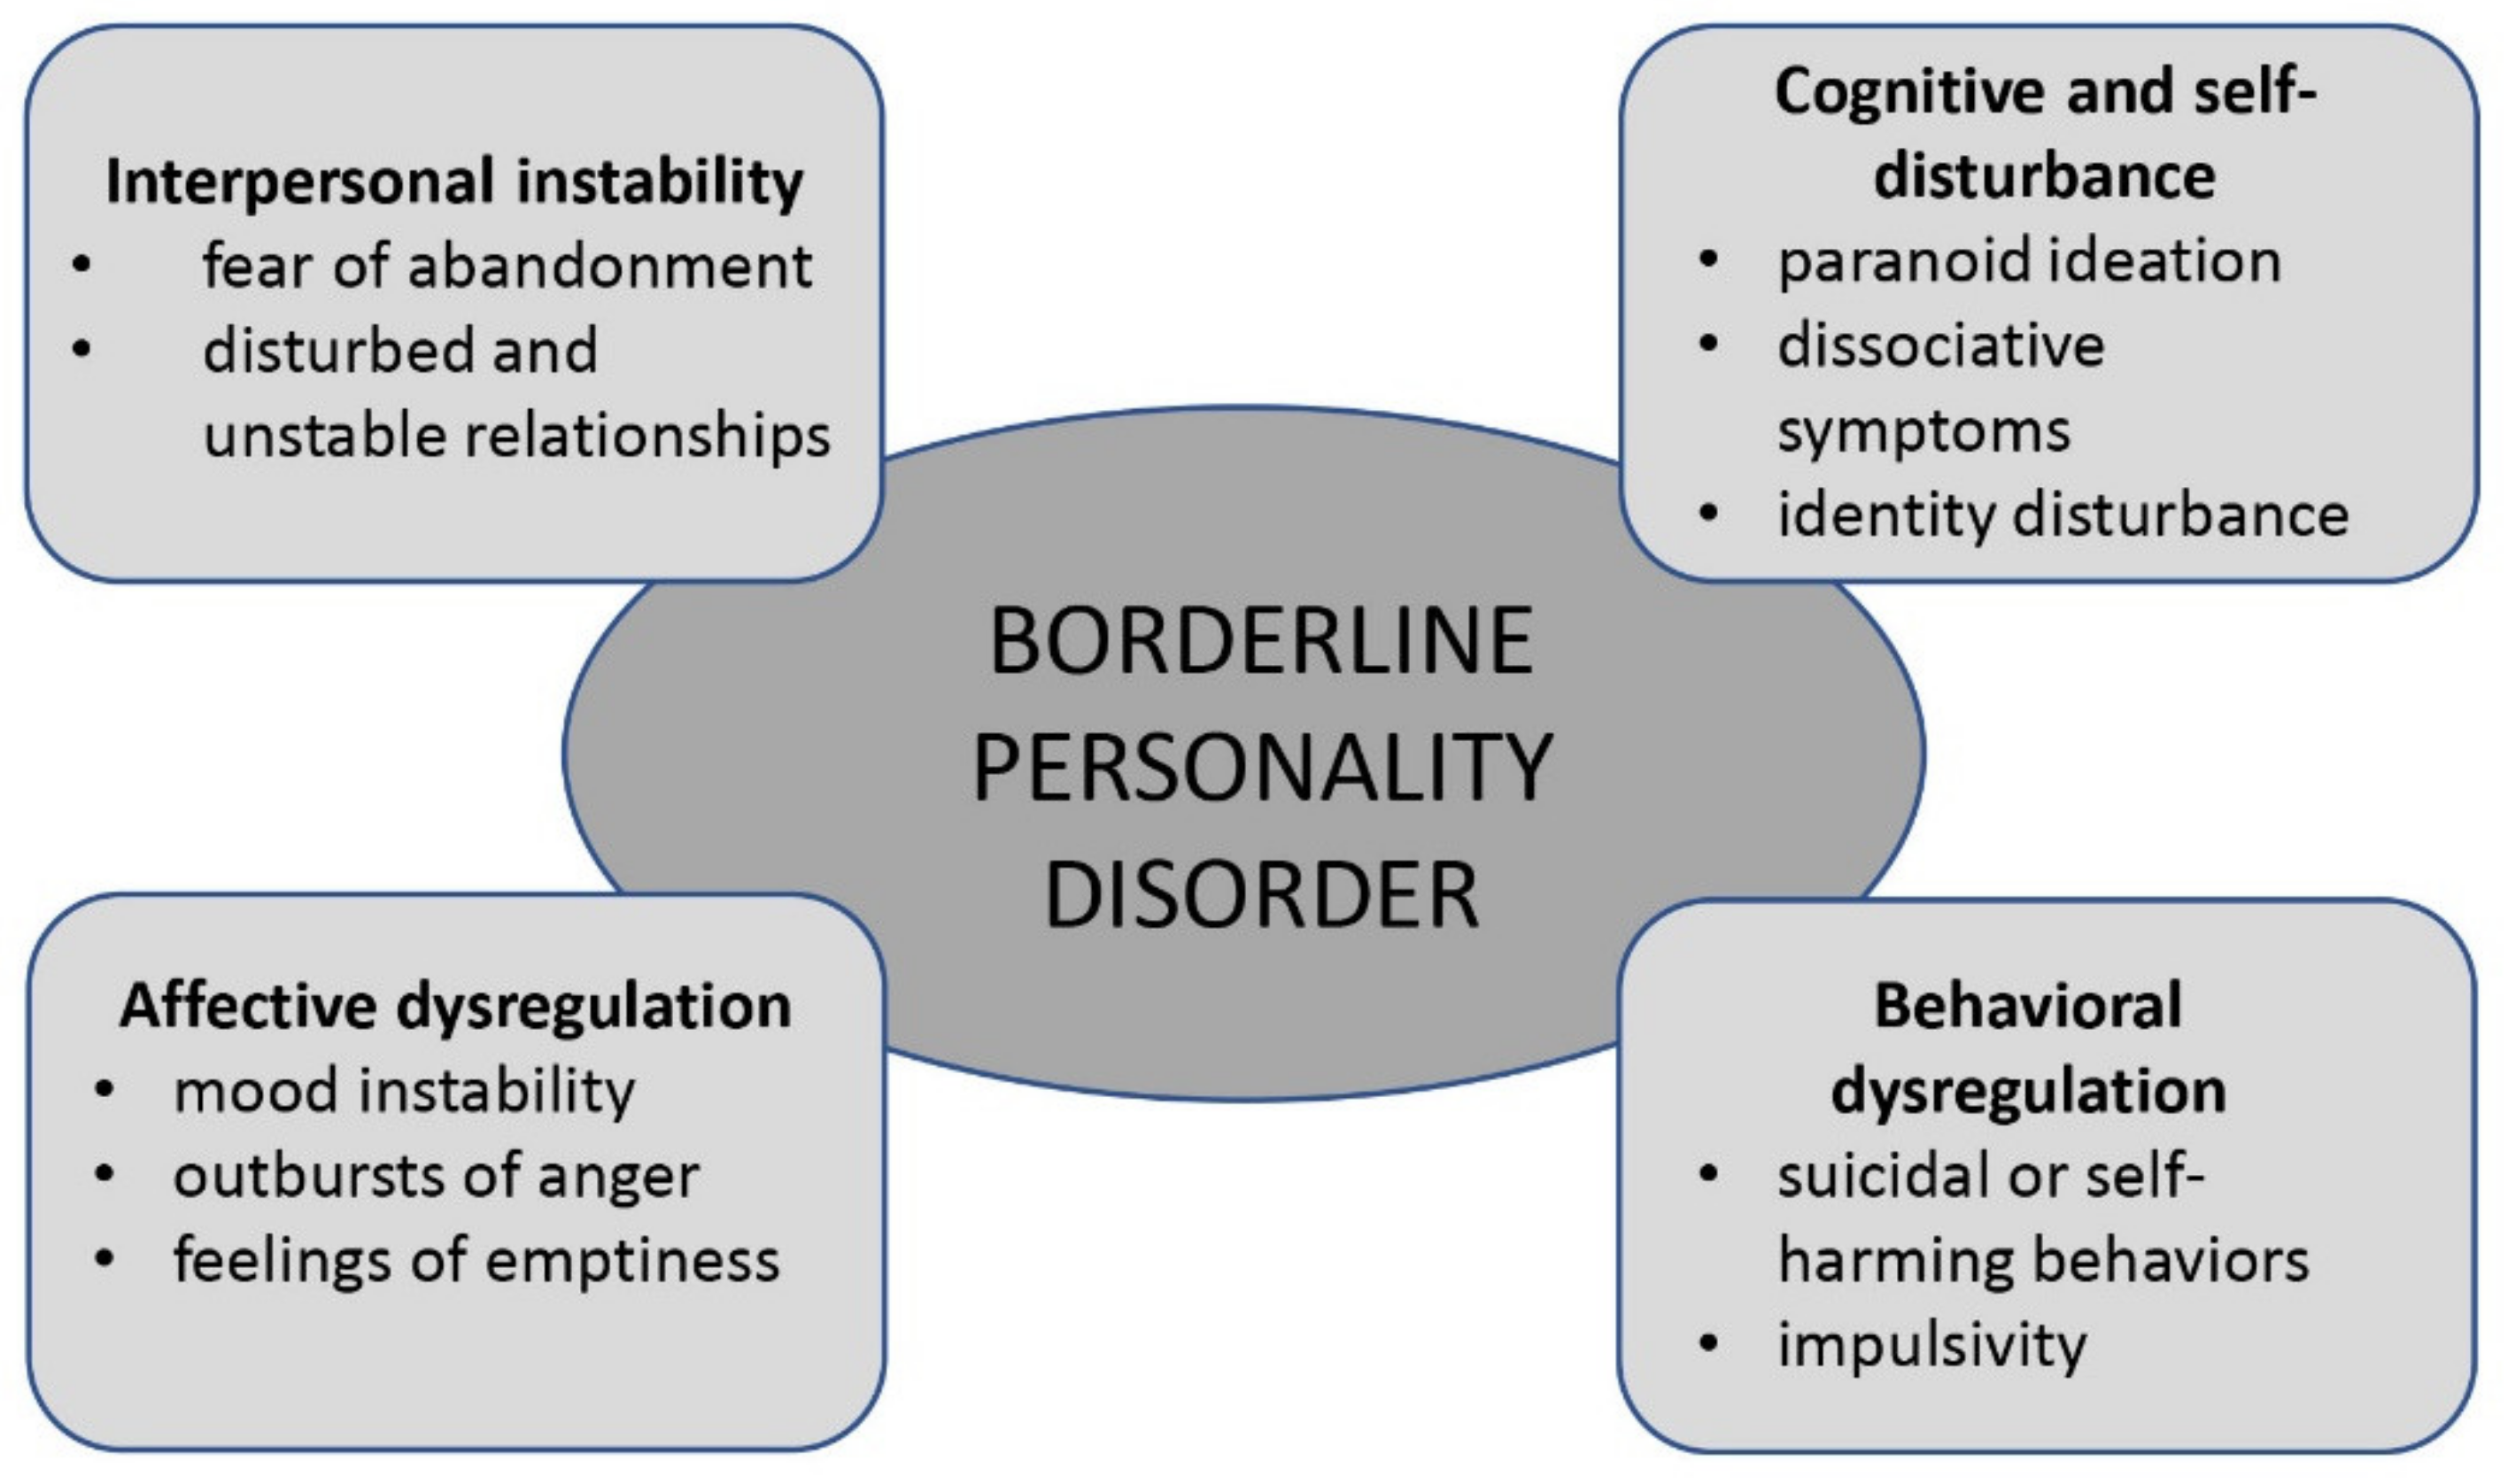 Borderline Personality Disorder (BPD): Prevalence, Management Options and  Challenges